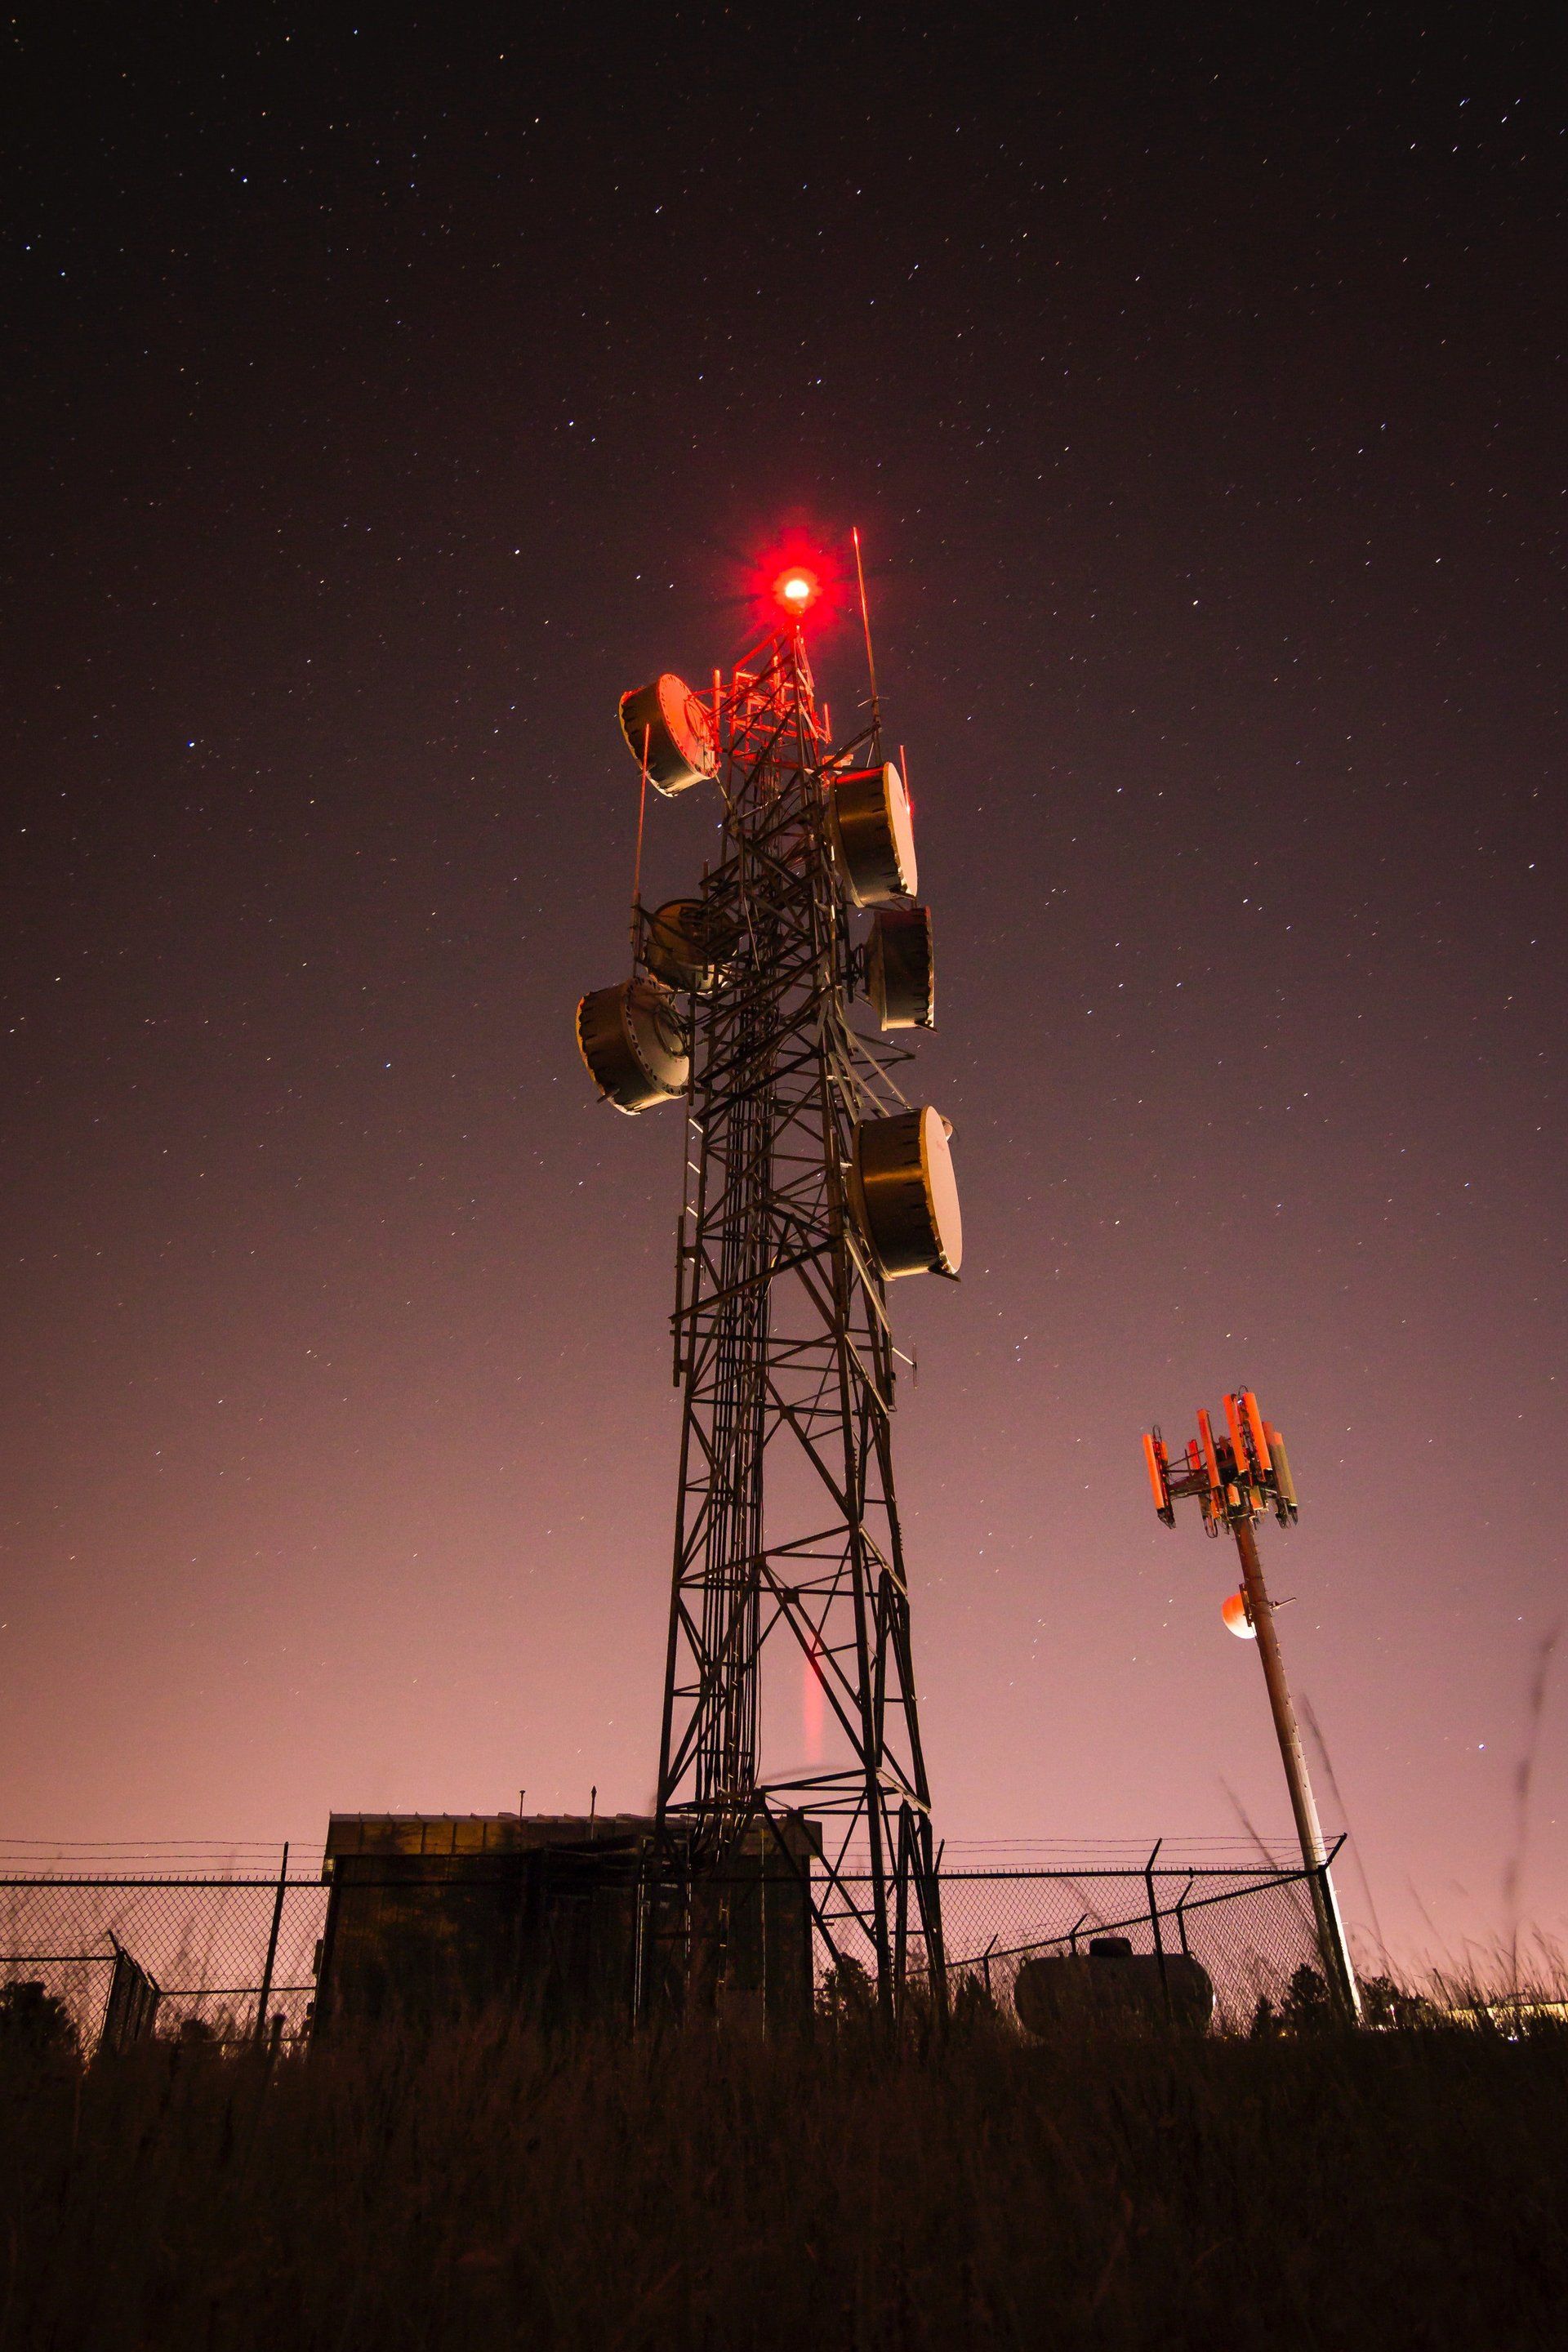 A telephone tower with a red light on top of it at night.